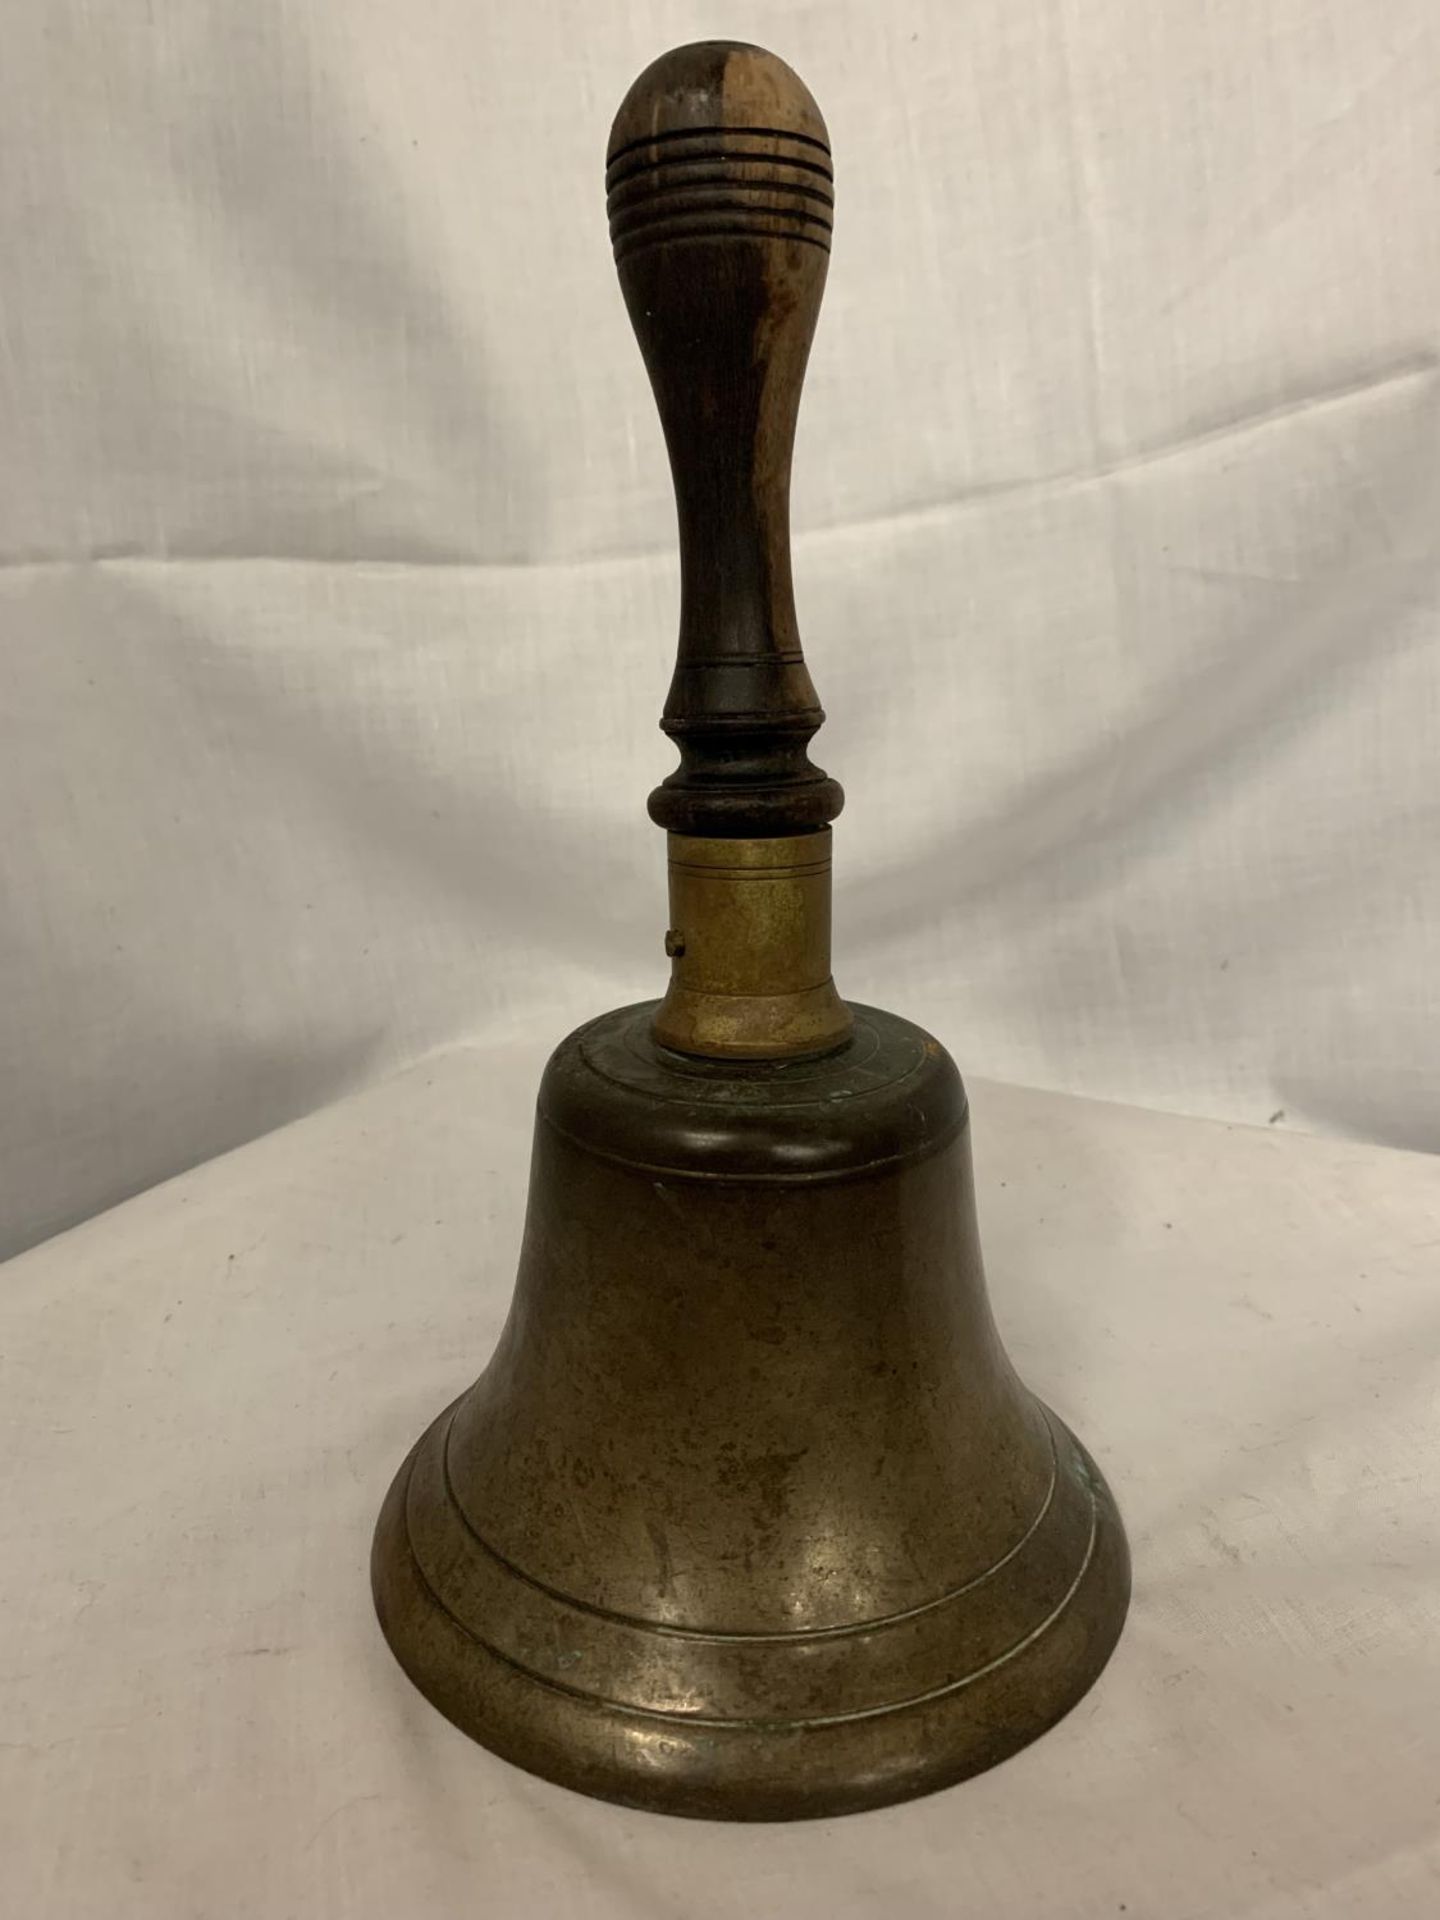 A VINTAGE BRASS SCHOOL BELL WITH WOODEN HANDLE